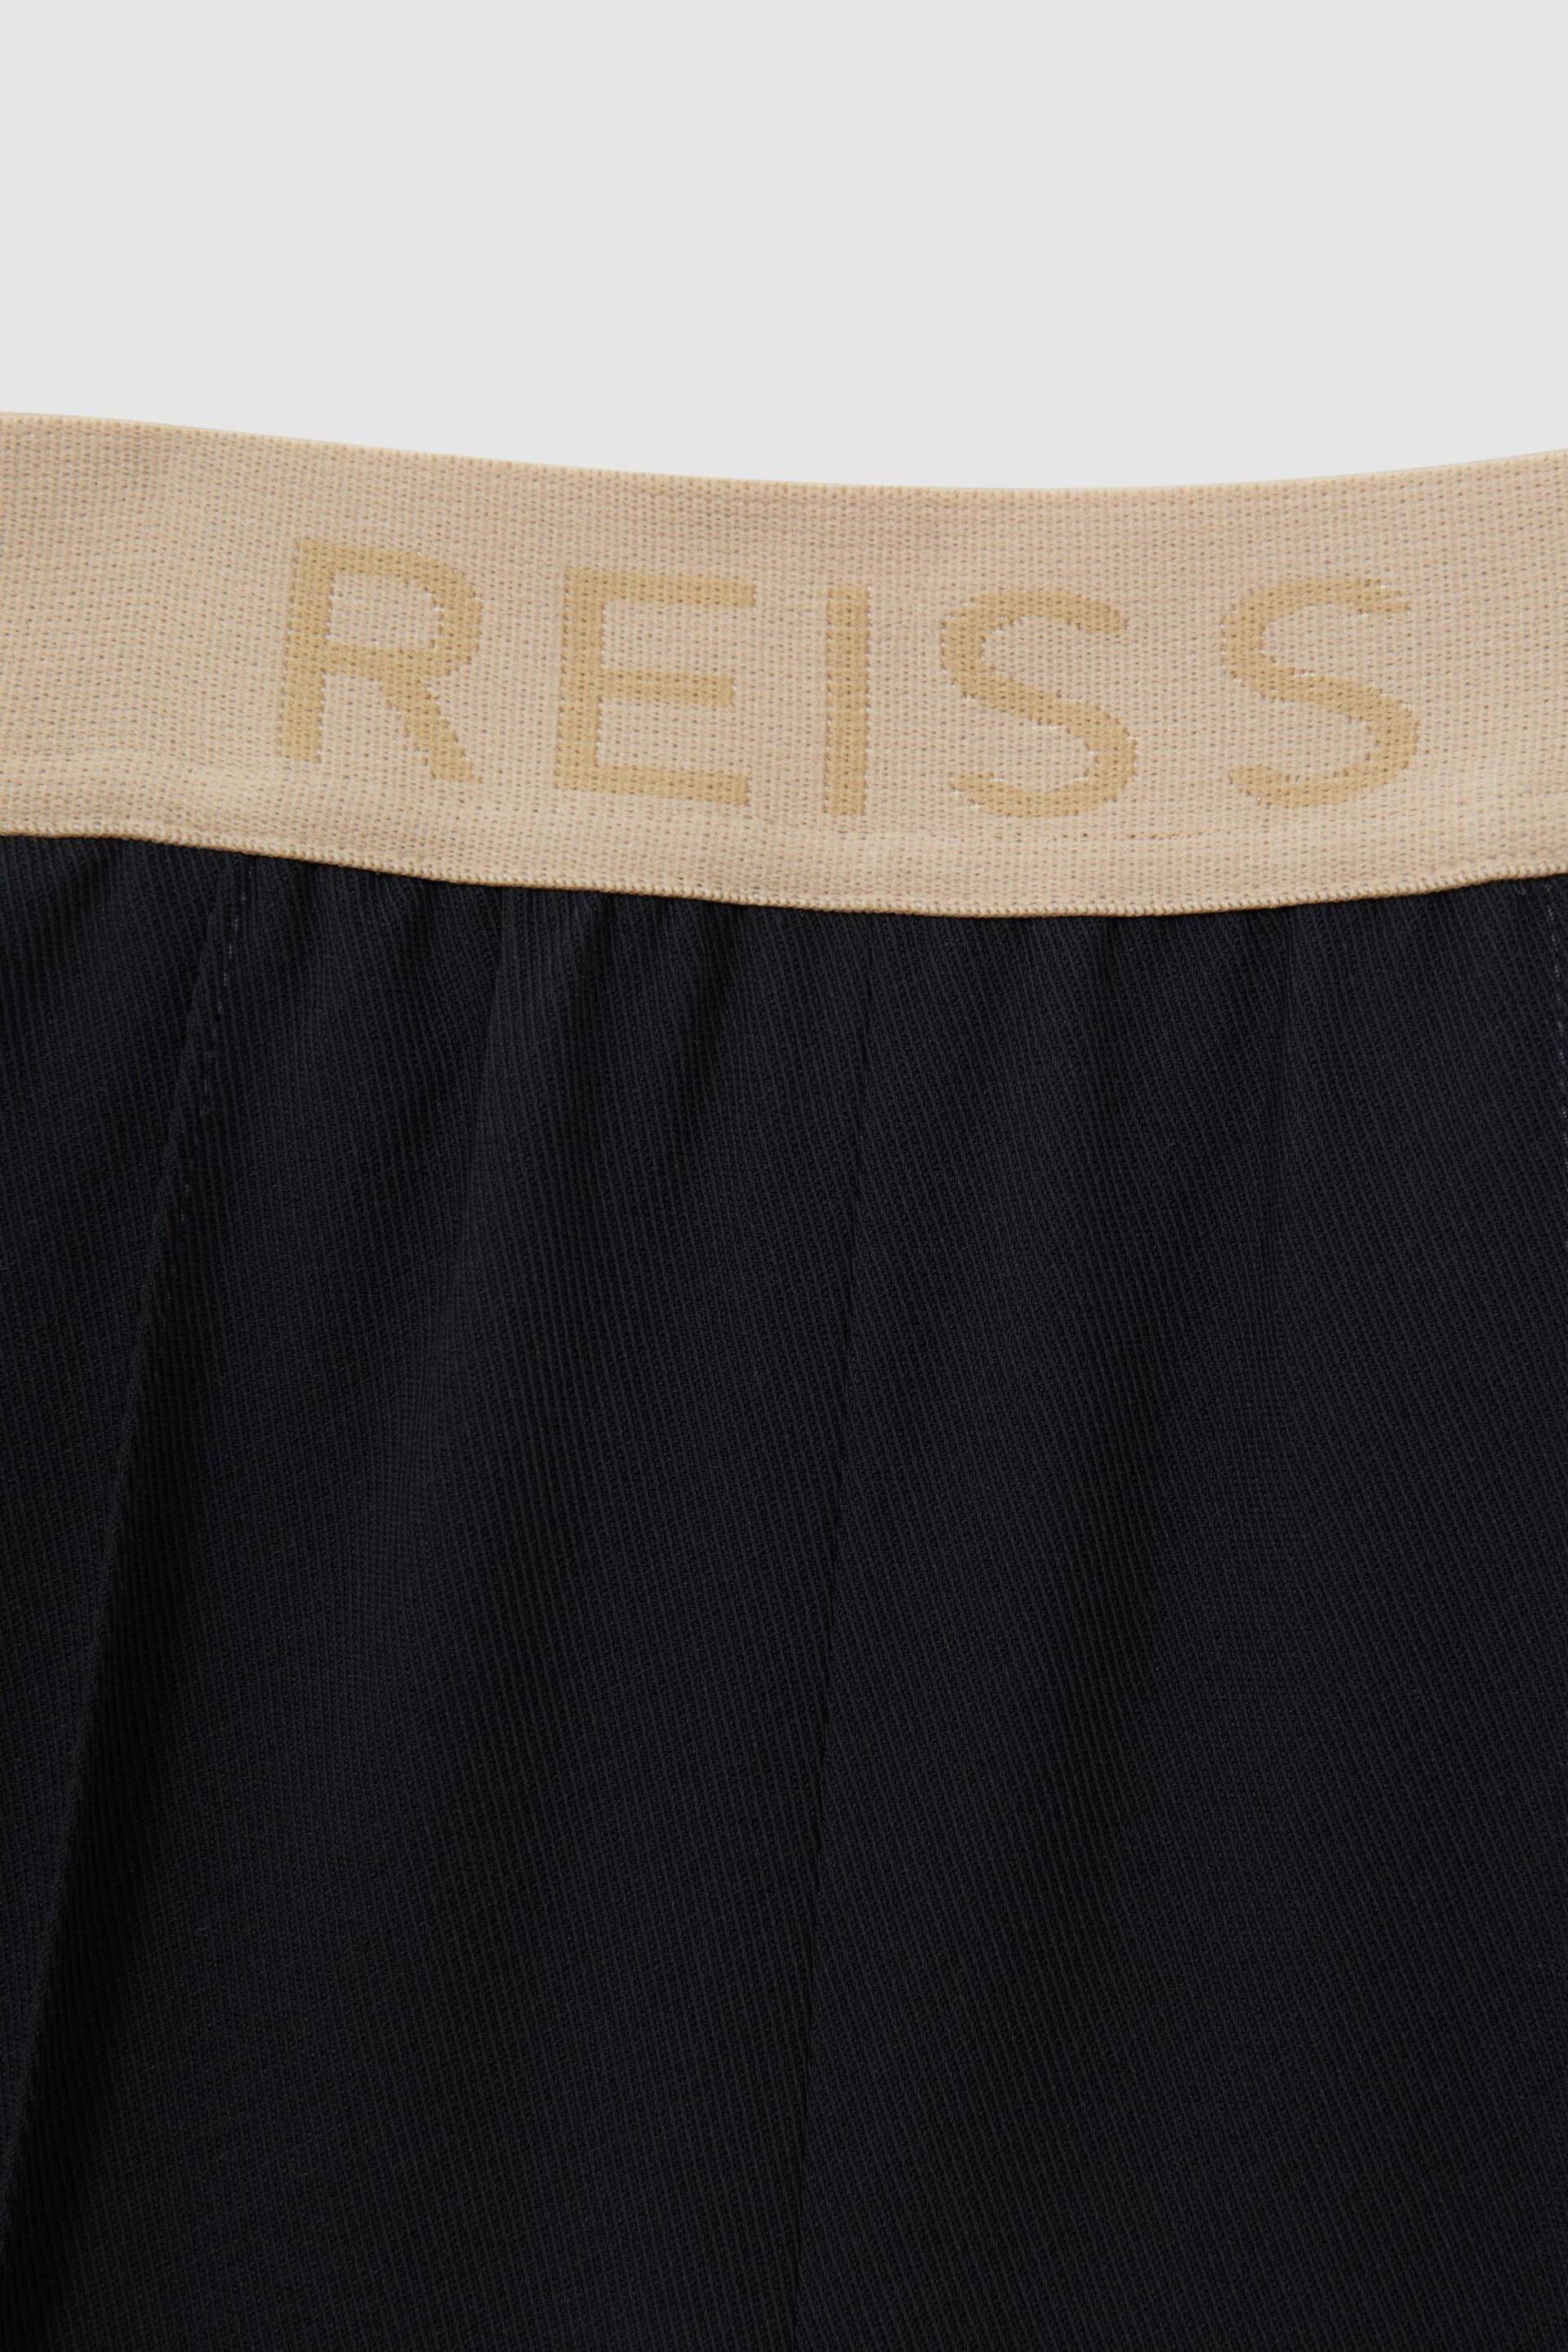 Reiss Navy Ayana Junior Elasticated Wide Leg Trousers - Image 4 of 6